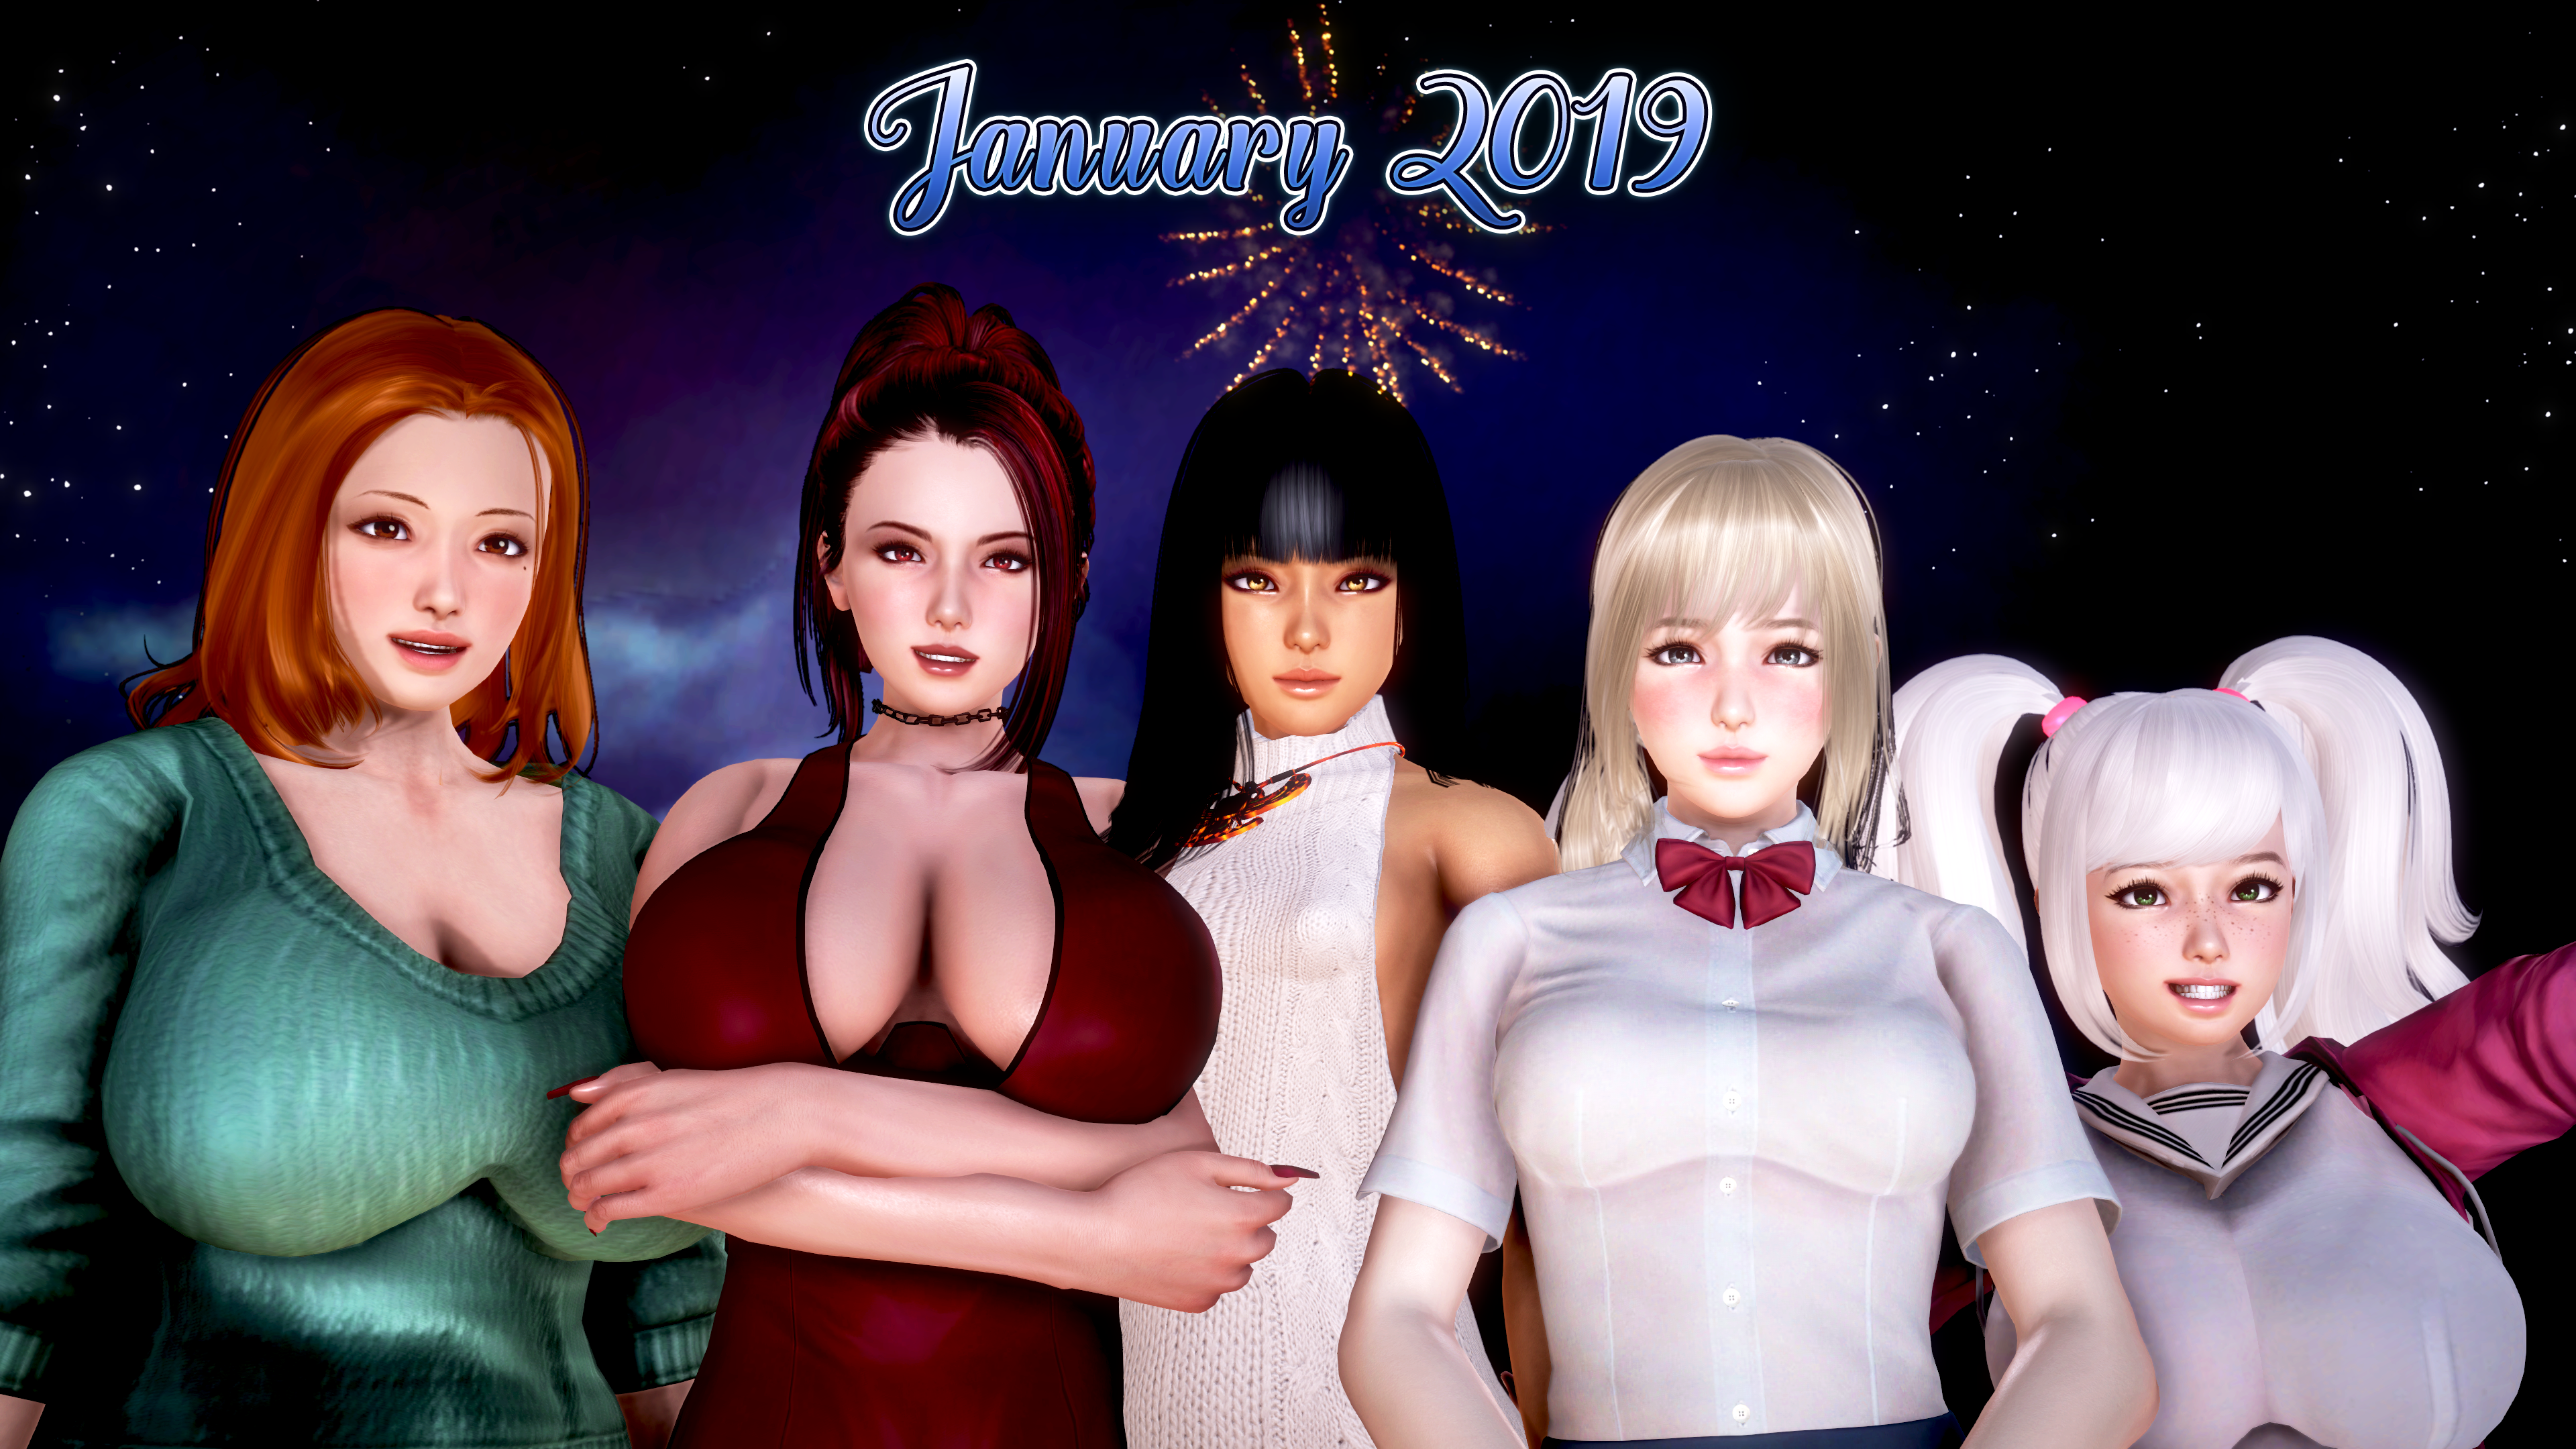 The girls of Mythic Manor would like to say Happy New Year! 